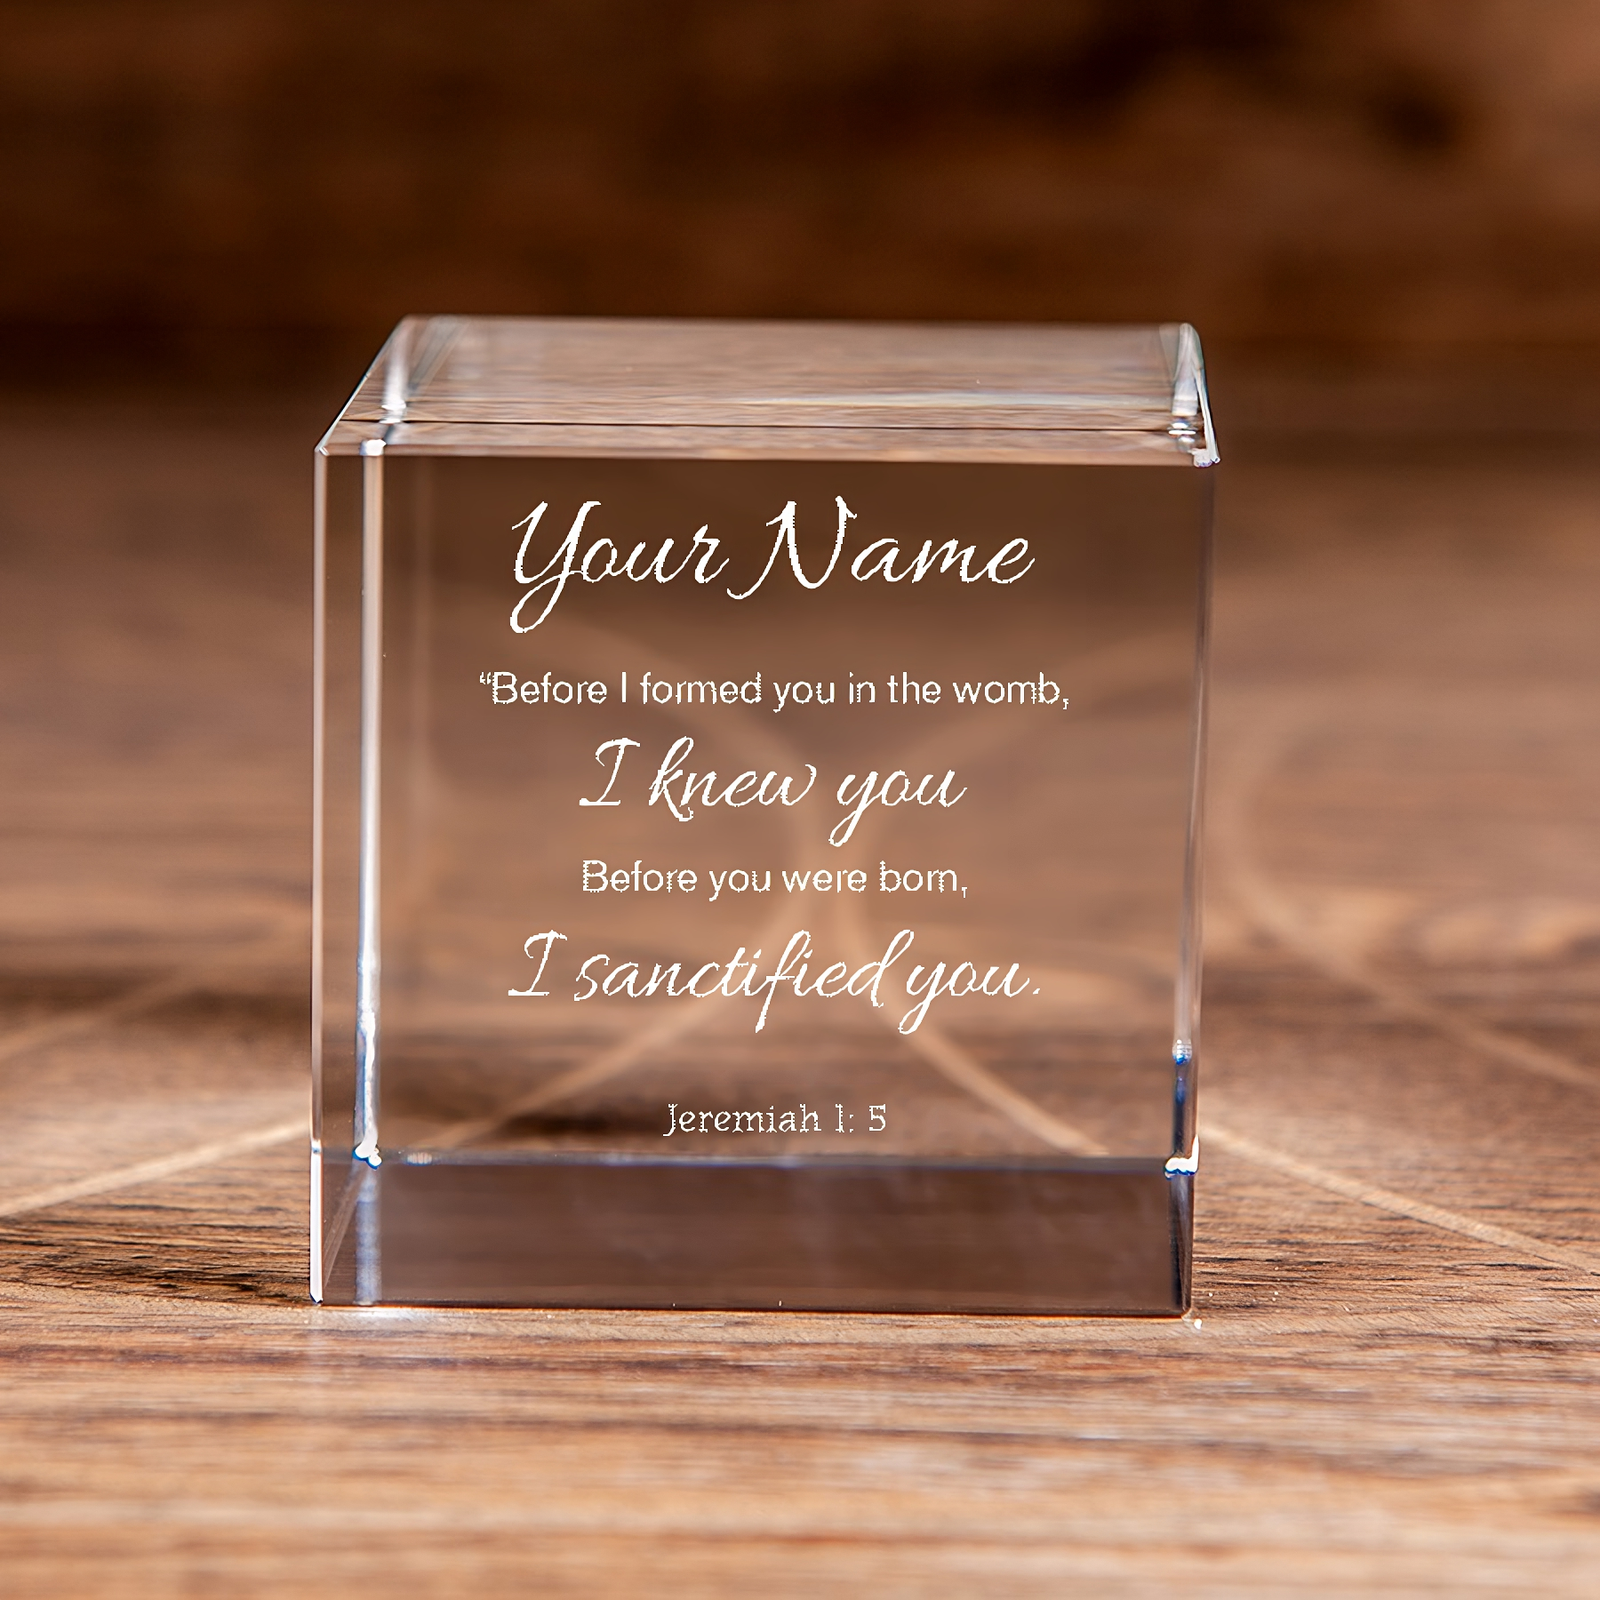 Jeremiah 1:5 I Sanctified You Square Cut Crystal Cube Personalized Christian Gift-Express Your Love Gifts